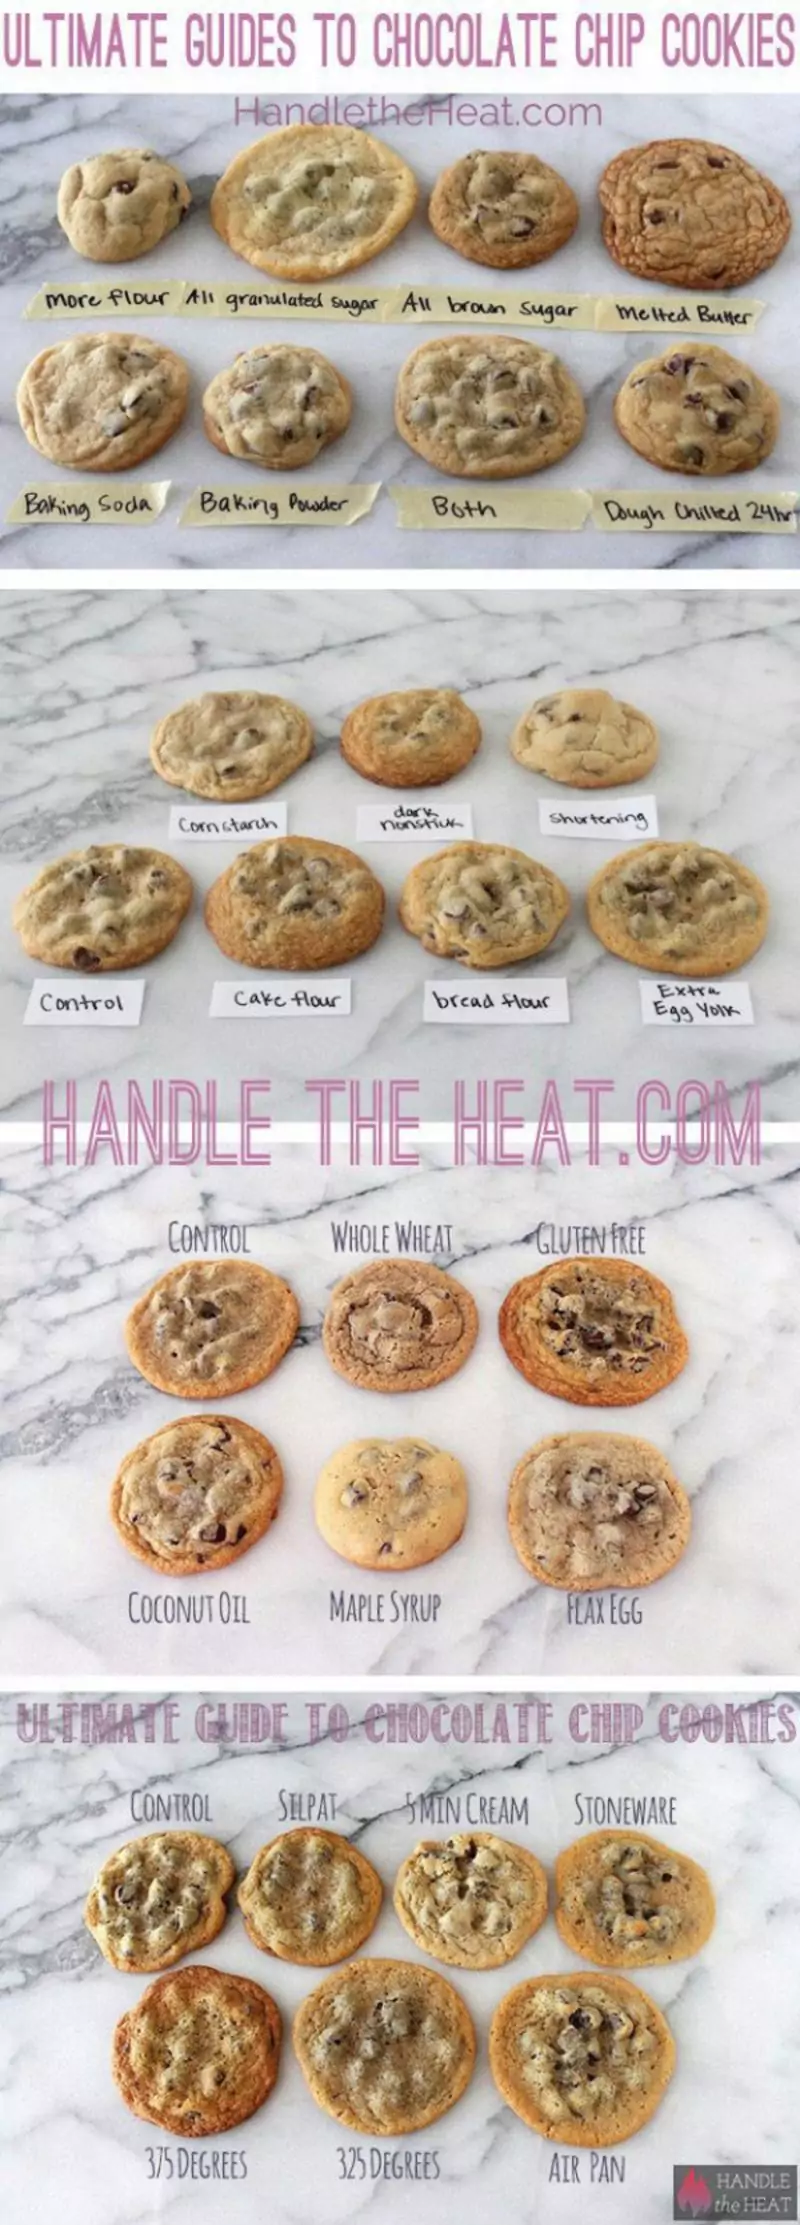 Ultimate Guide To Chocolate Chip Cookies